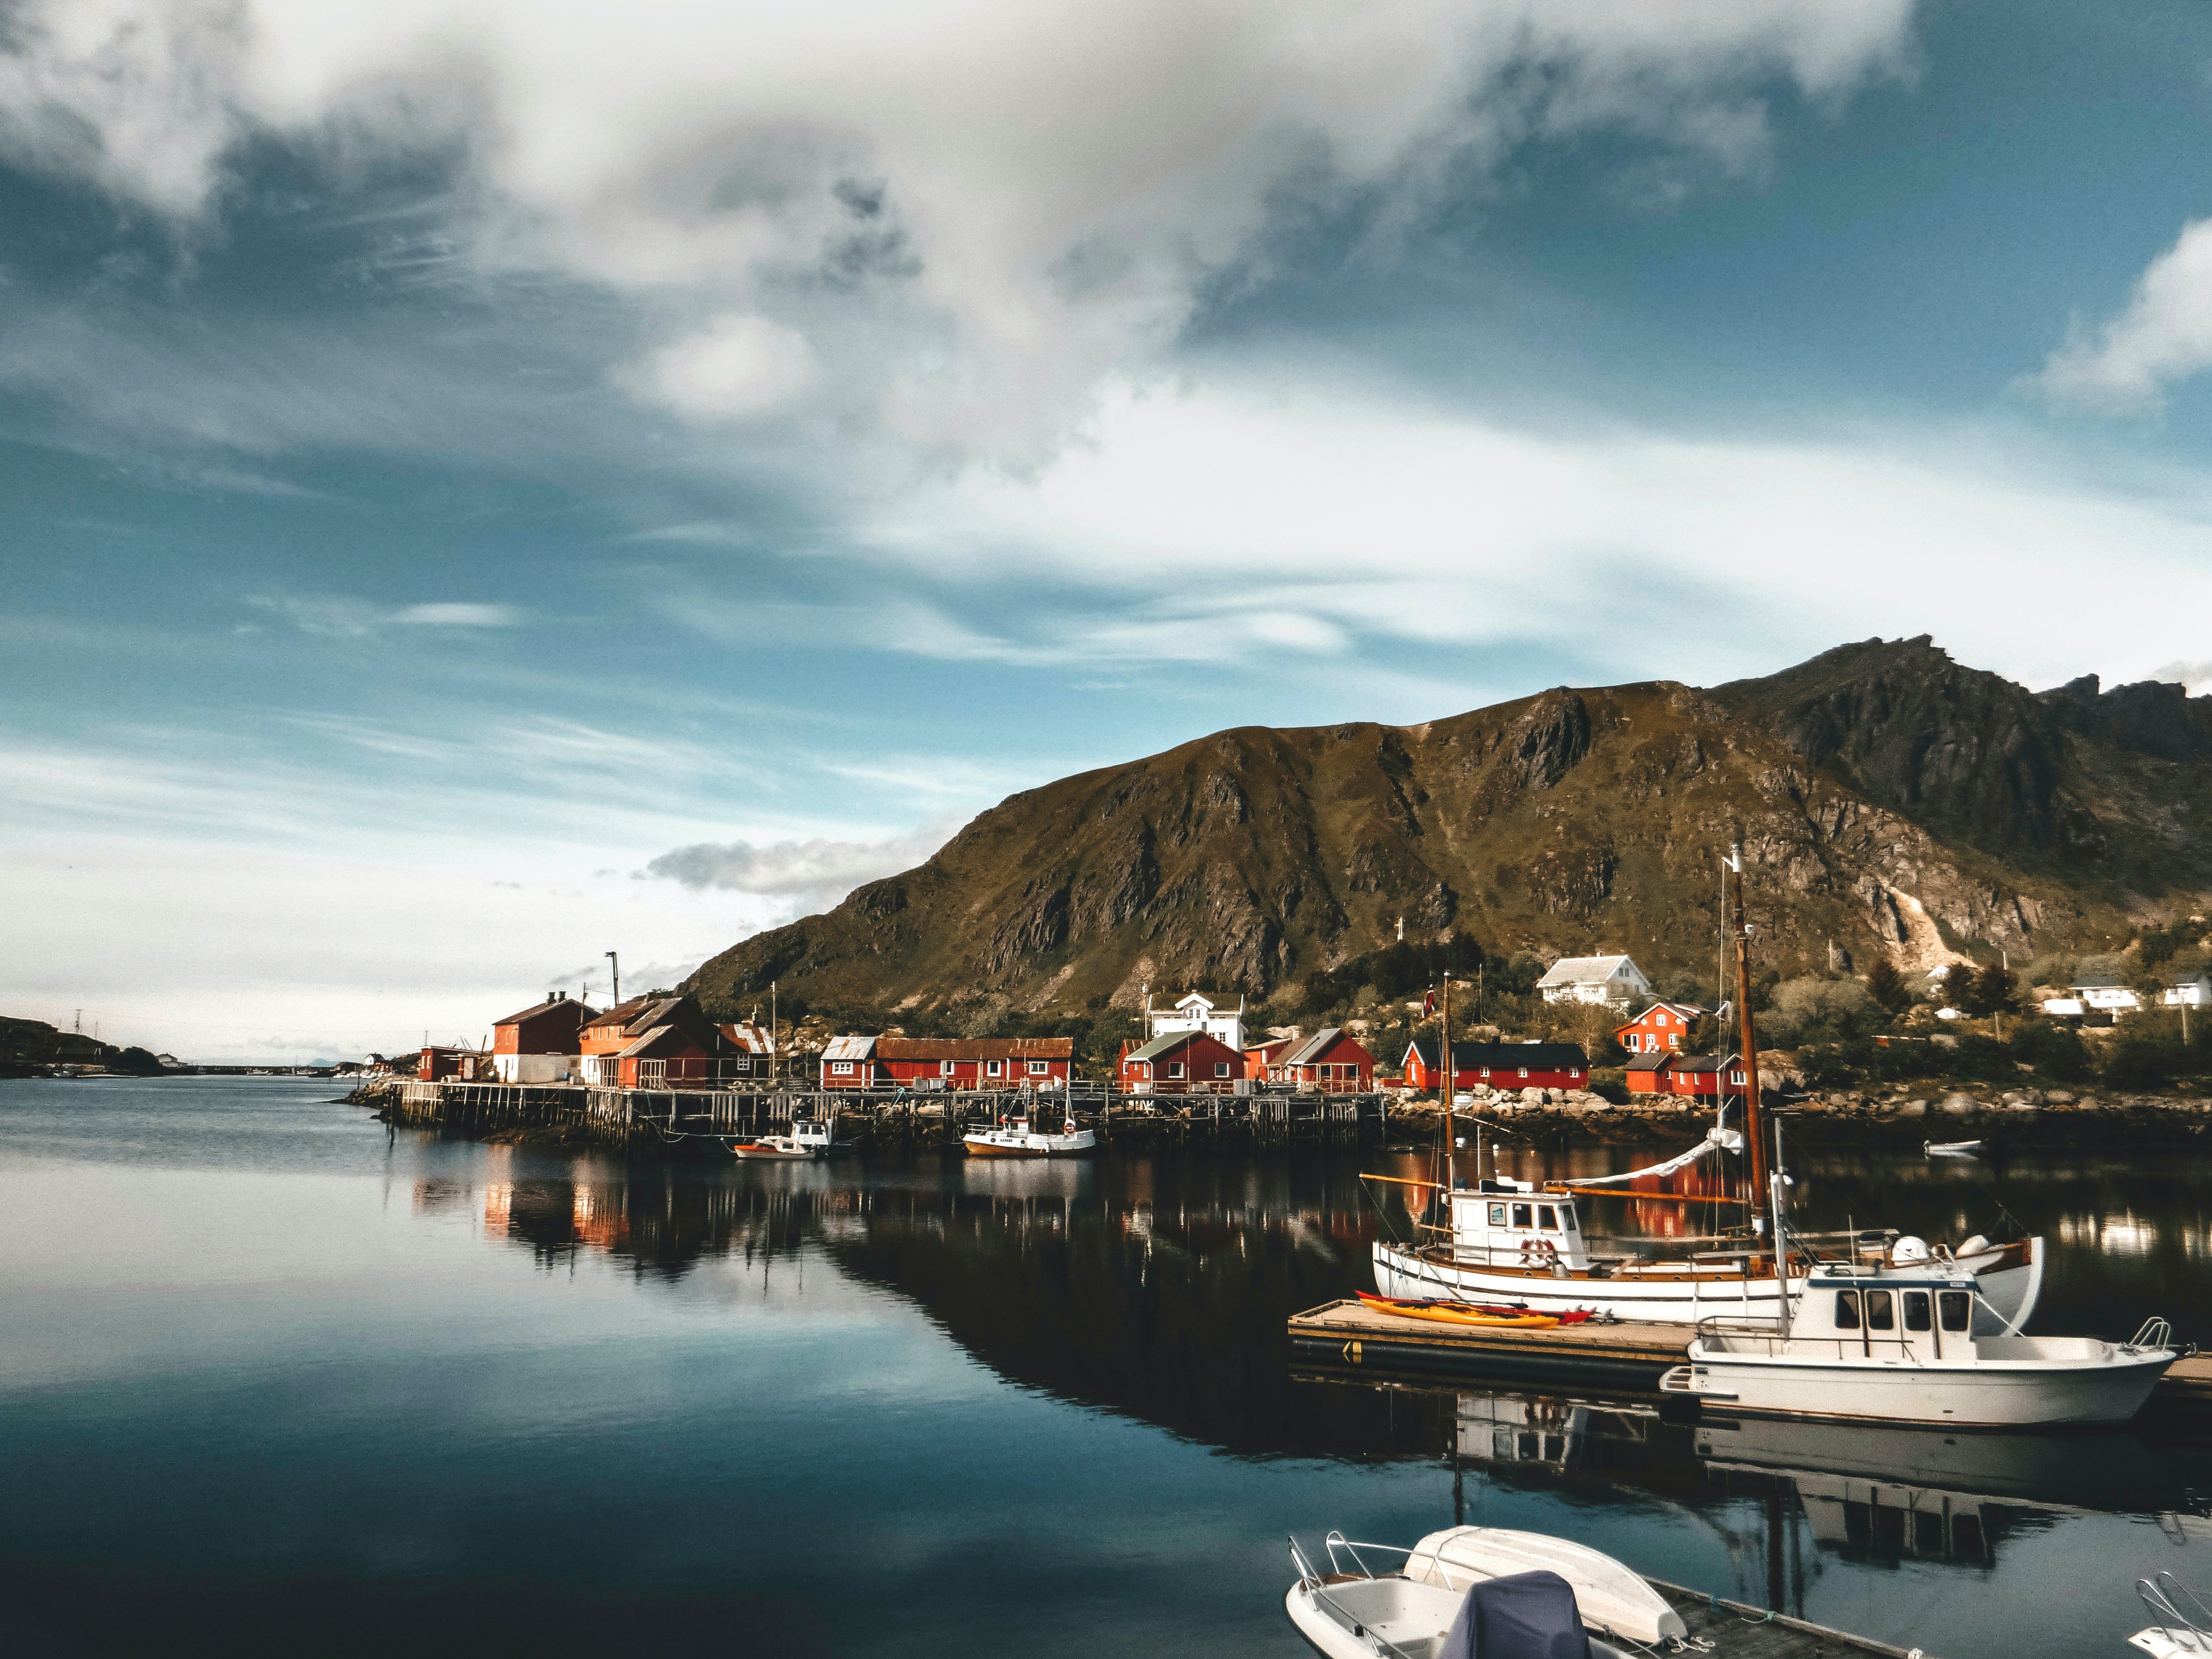 Norway is a covid alternative travel destination with fishing boats in the sea and wooden red houses.